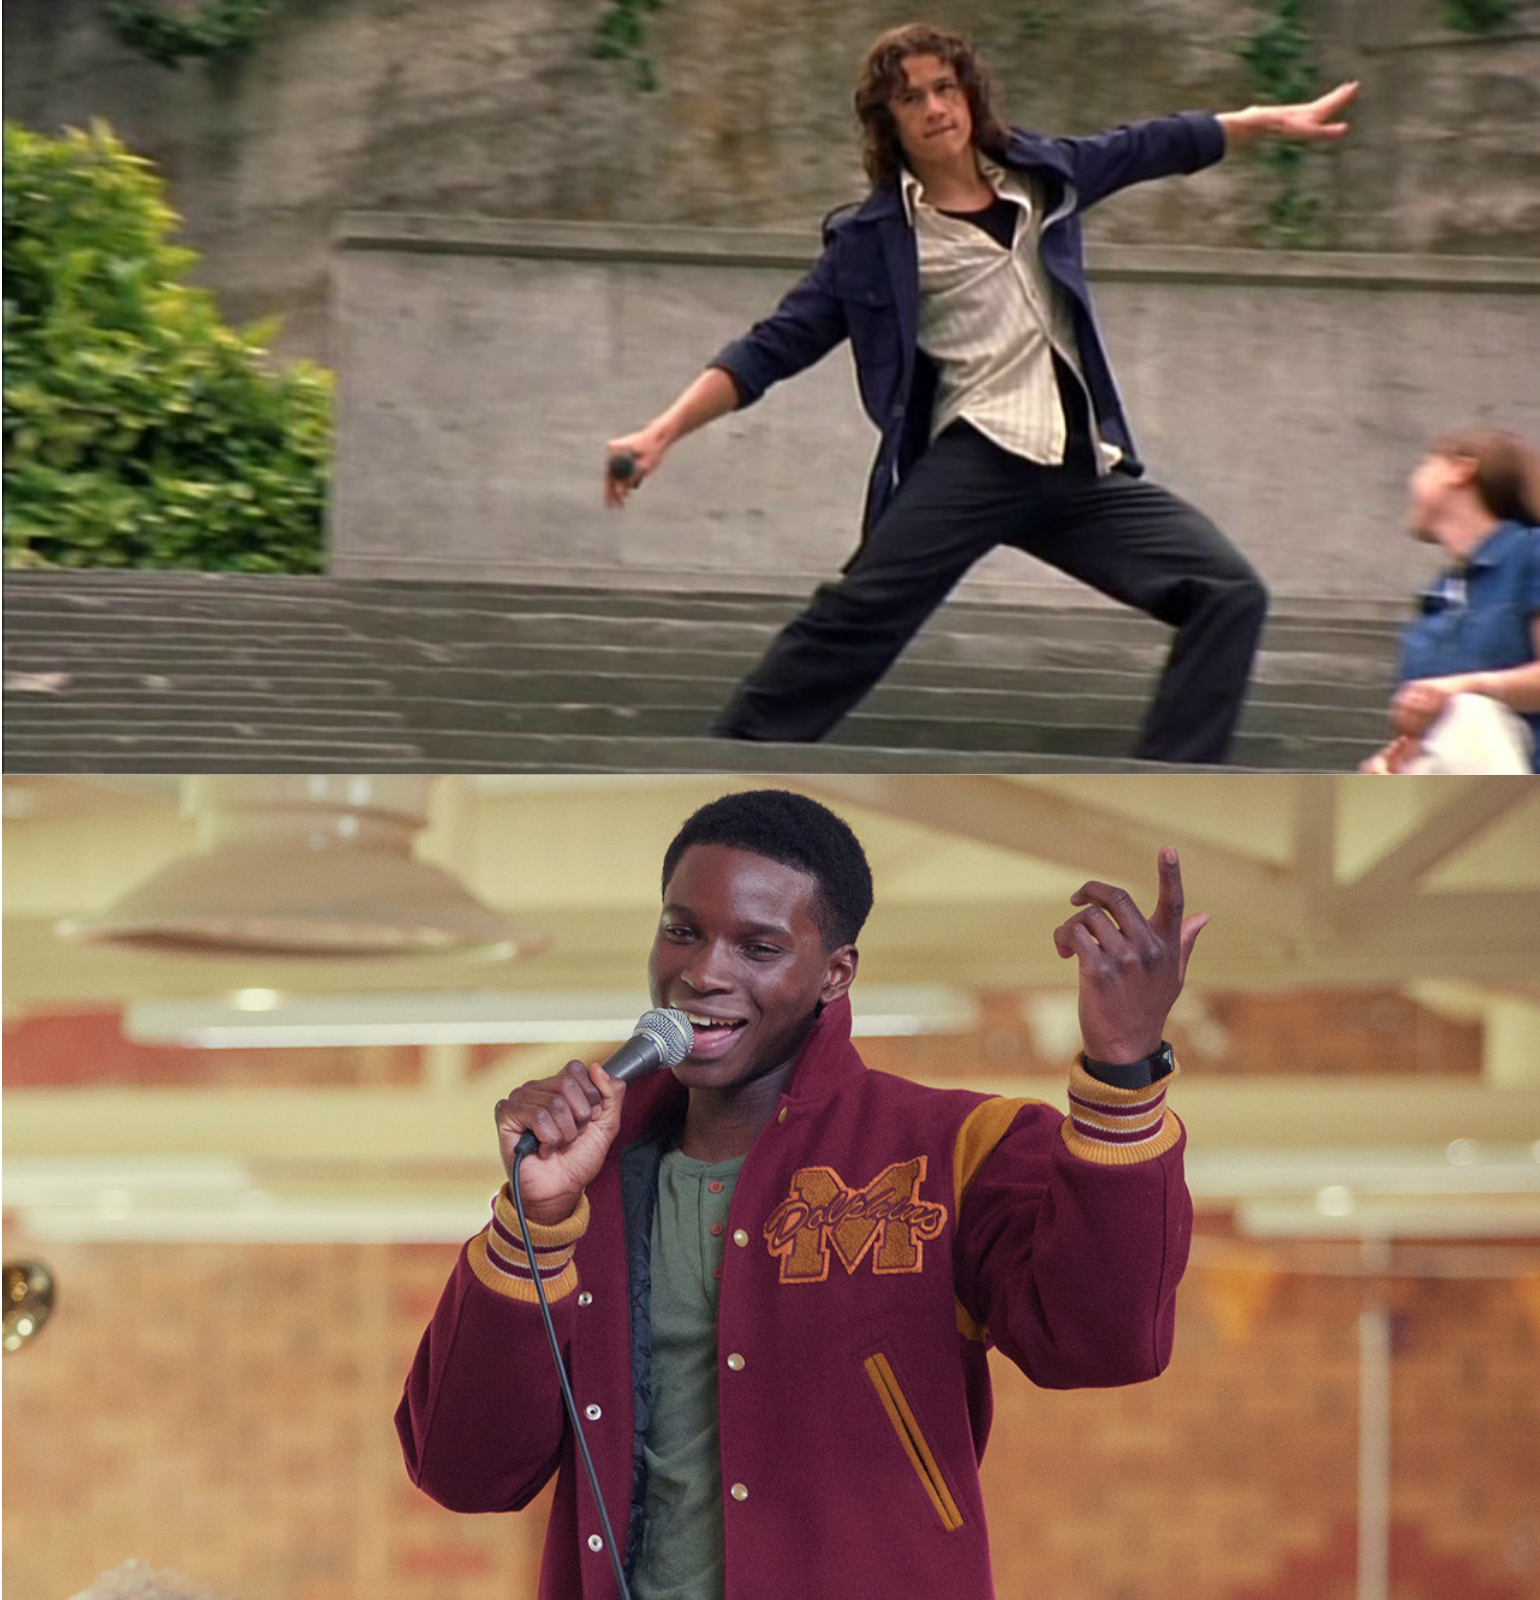 Upper Panel: Heath Ledger with a microphone dancing on the steps in 10 Things I Hate About You. Bottom Panel: Jackson from Sex Education wearing a sports jacket and singing with a microphone in hand.